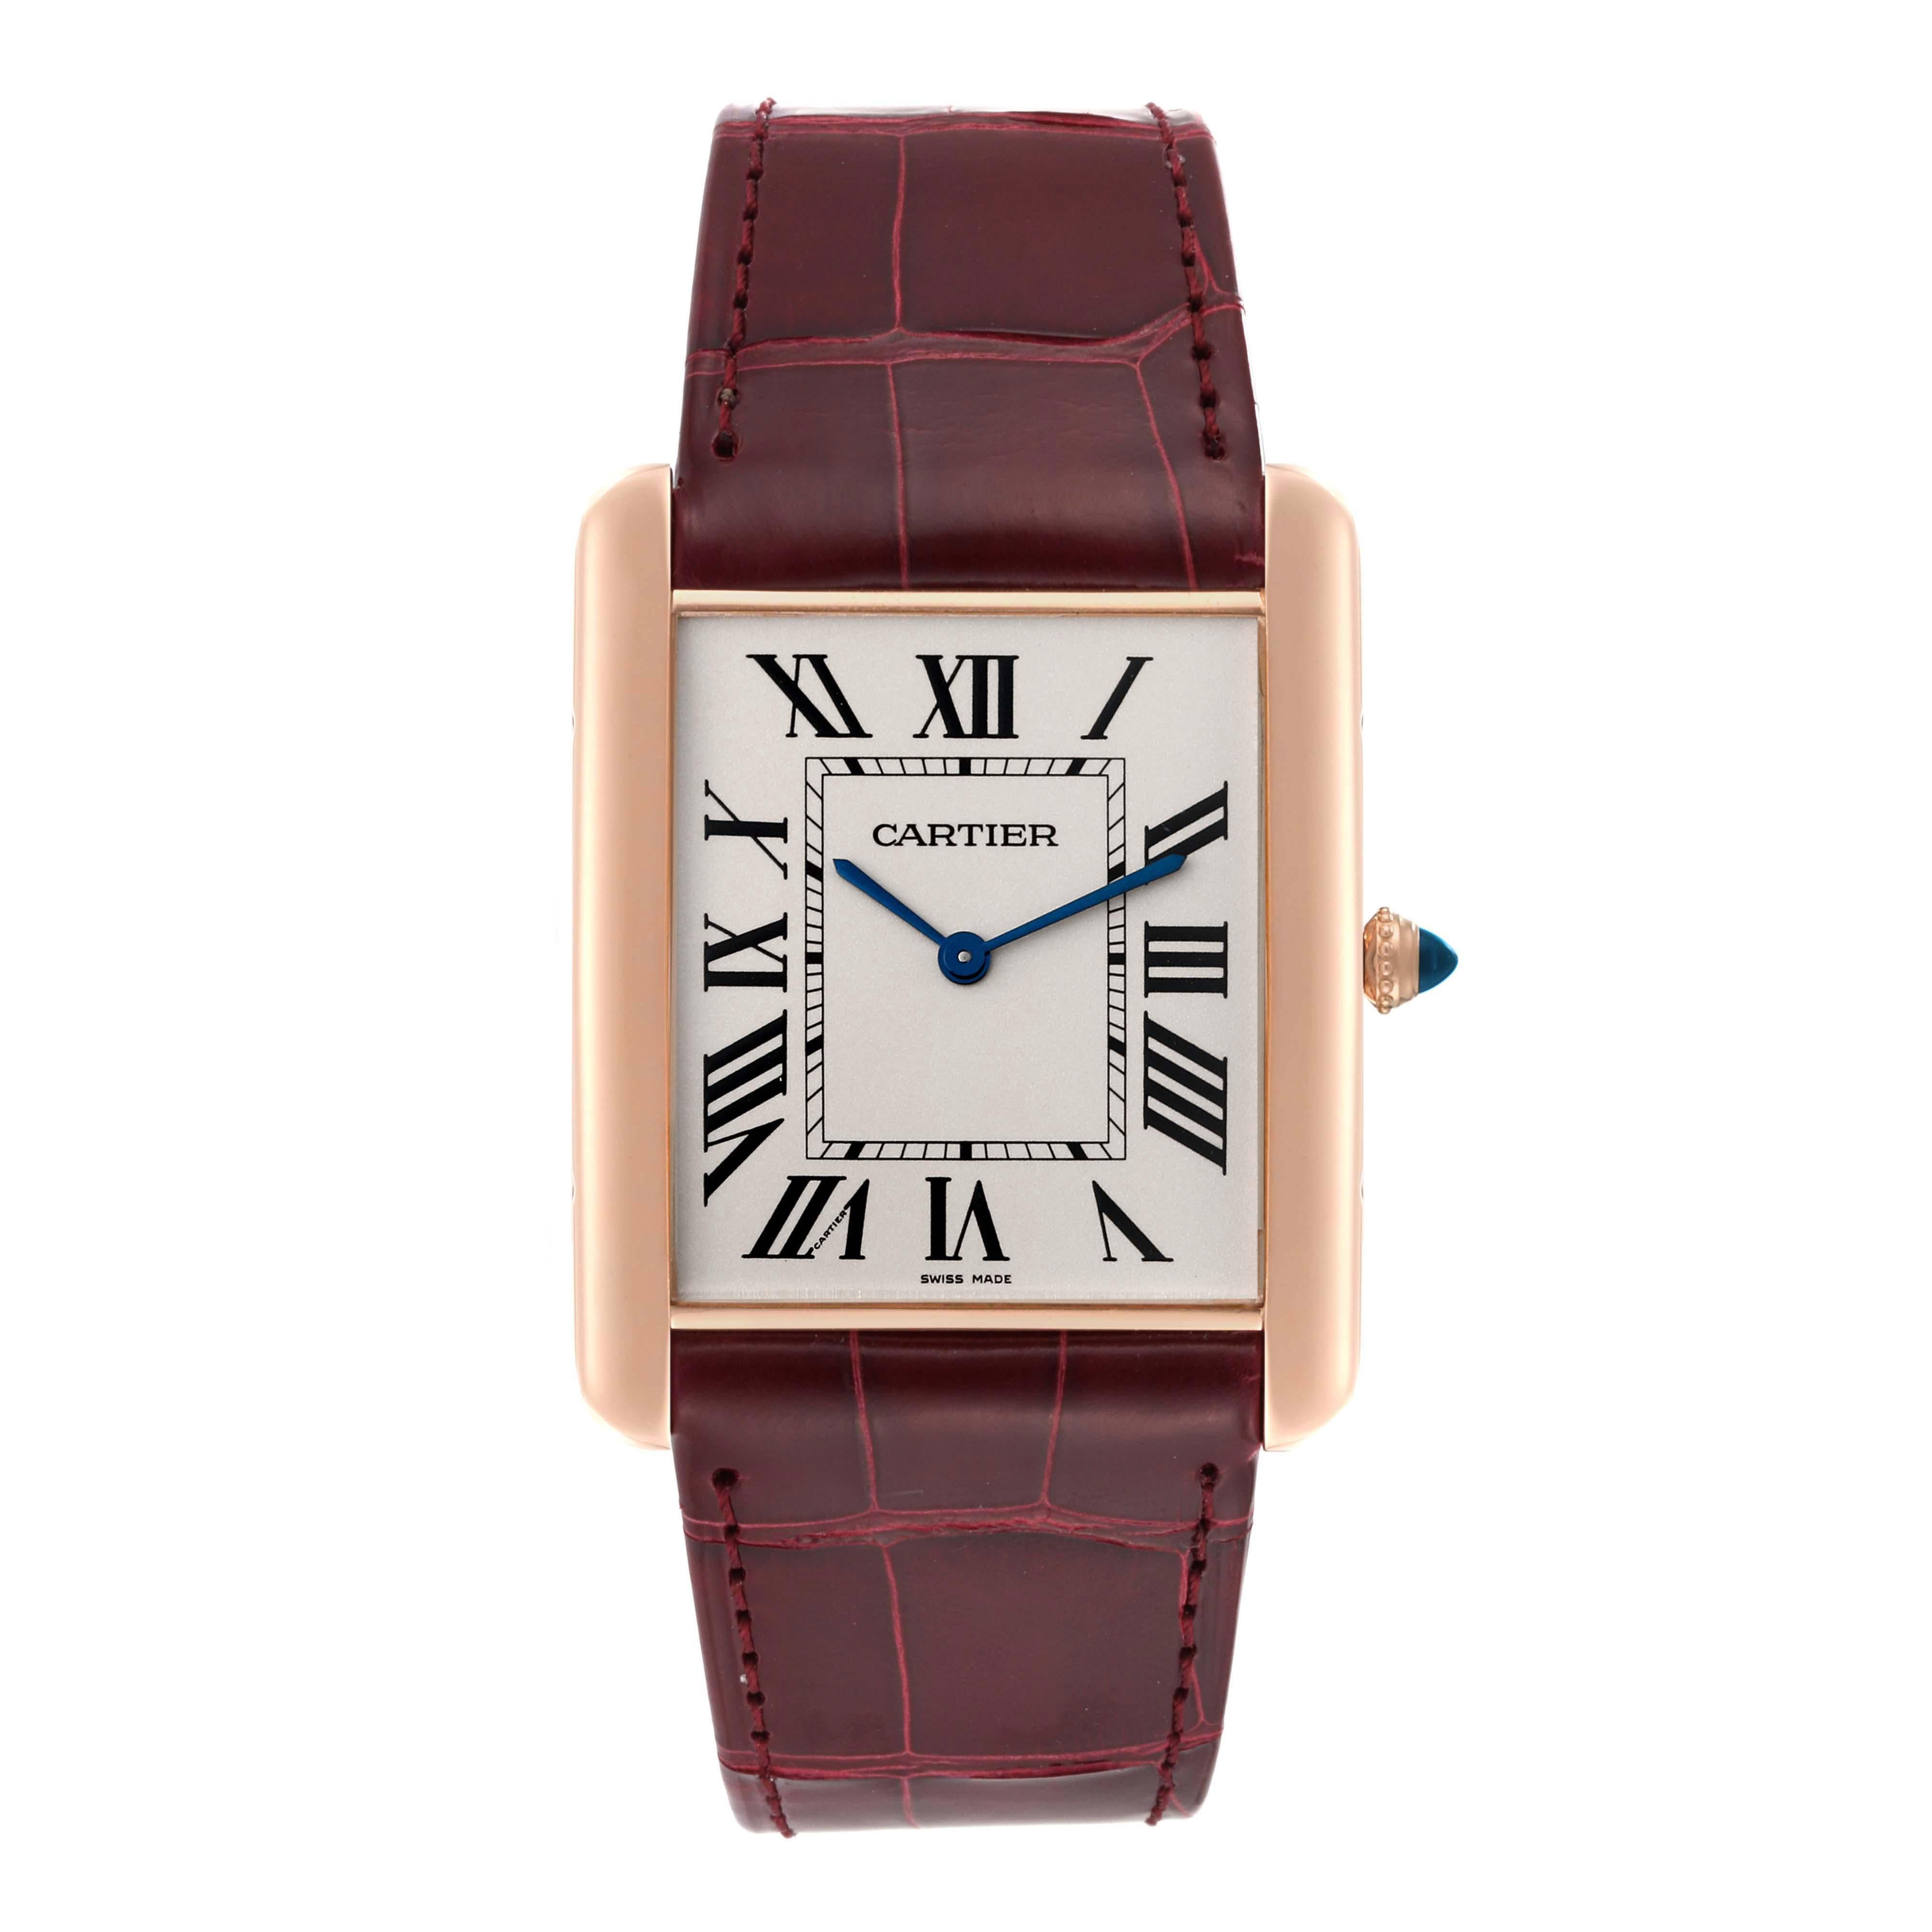 Cartier Tank Louis XL Rose Gold Manual Winding Mens Watch W1560017 Box Papers. Manual-winding movement. 18k rose gold case 40.4 mm x 34.92 mm. Case thickness: 5.1 mm. Circular grained crown set with a blue sapphire cabochon. . Mineral crystal.